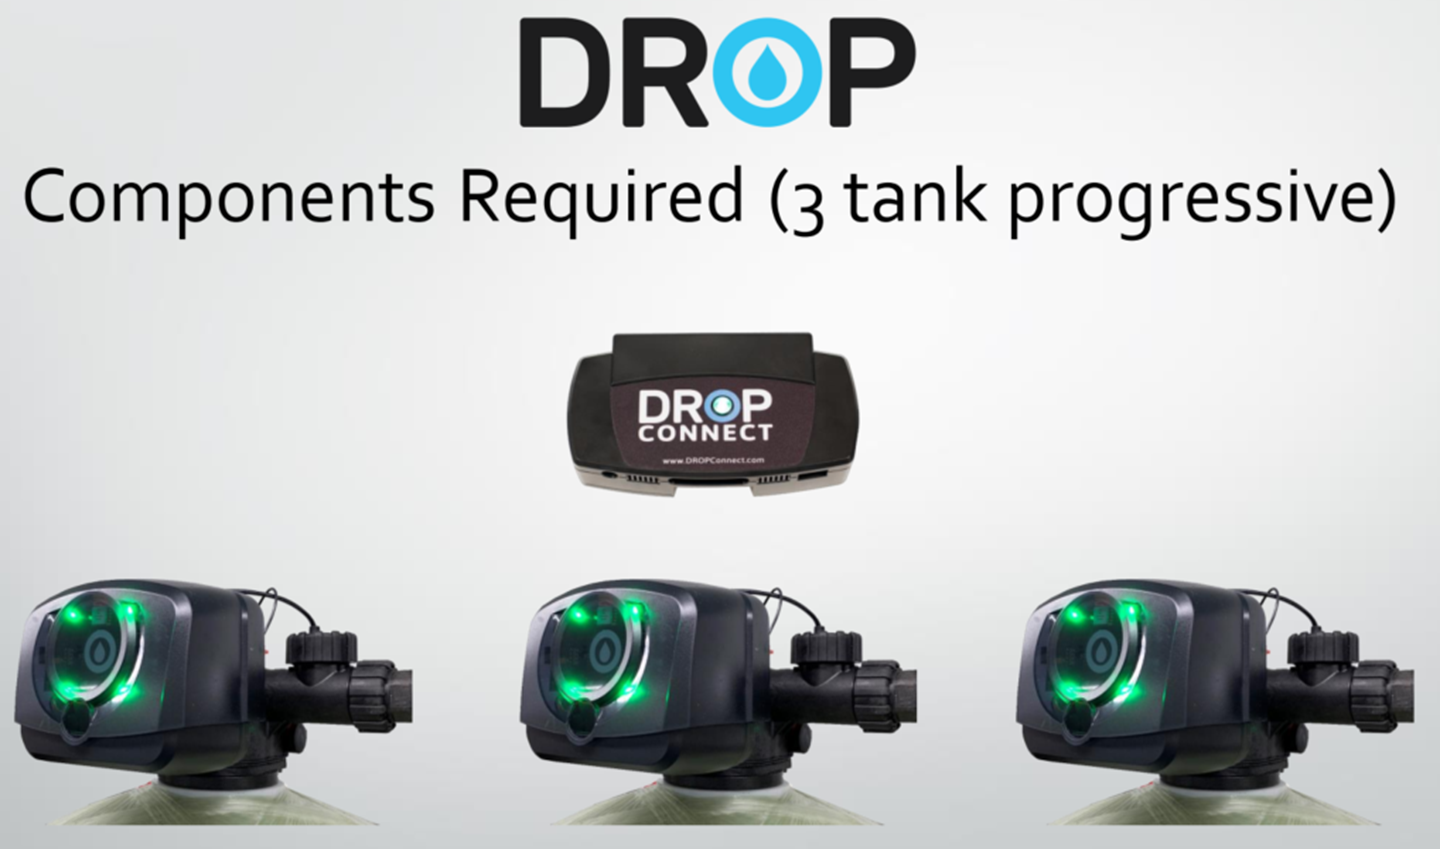 DROP® Componets Required (3 tank progressive) Photo of three DROP® Connect Systems